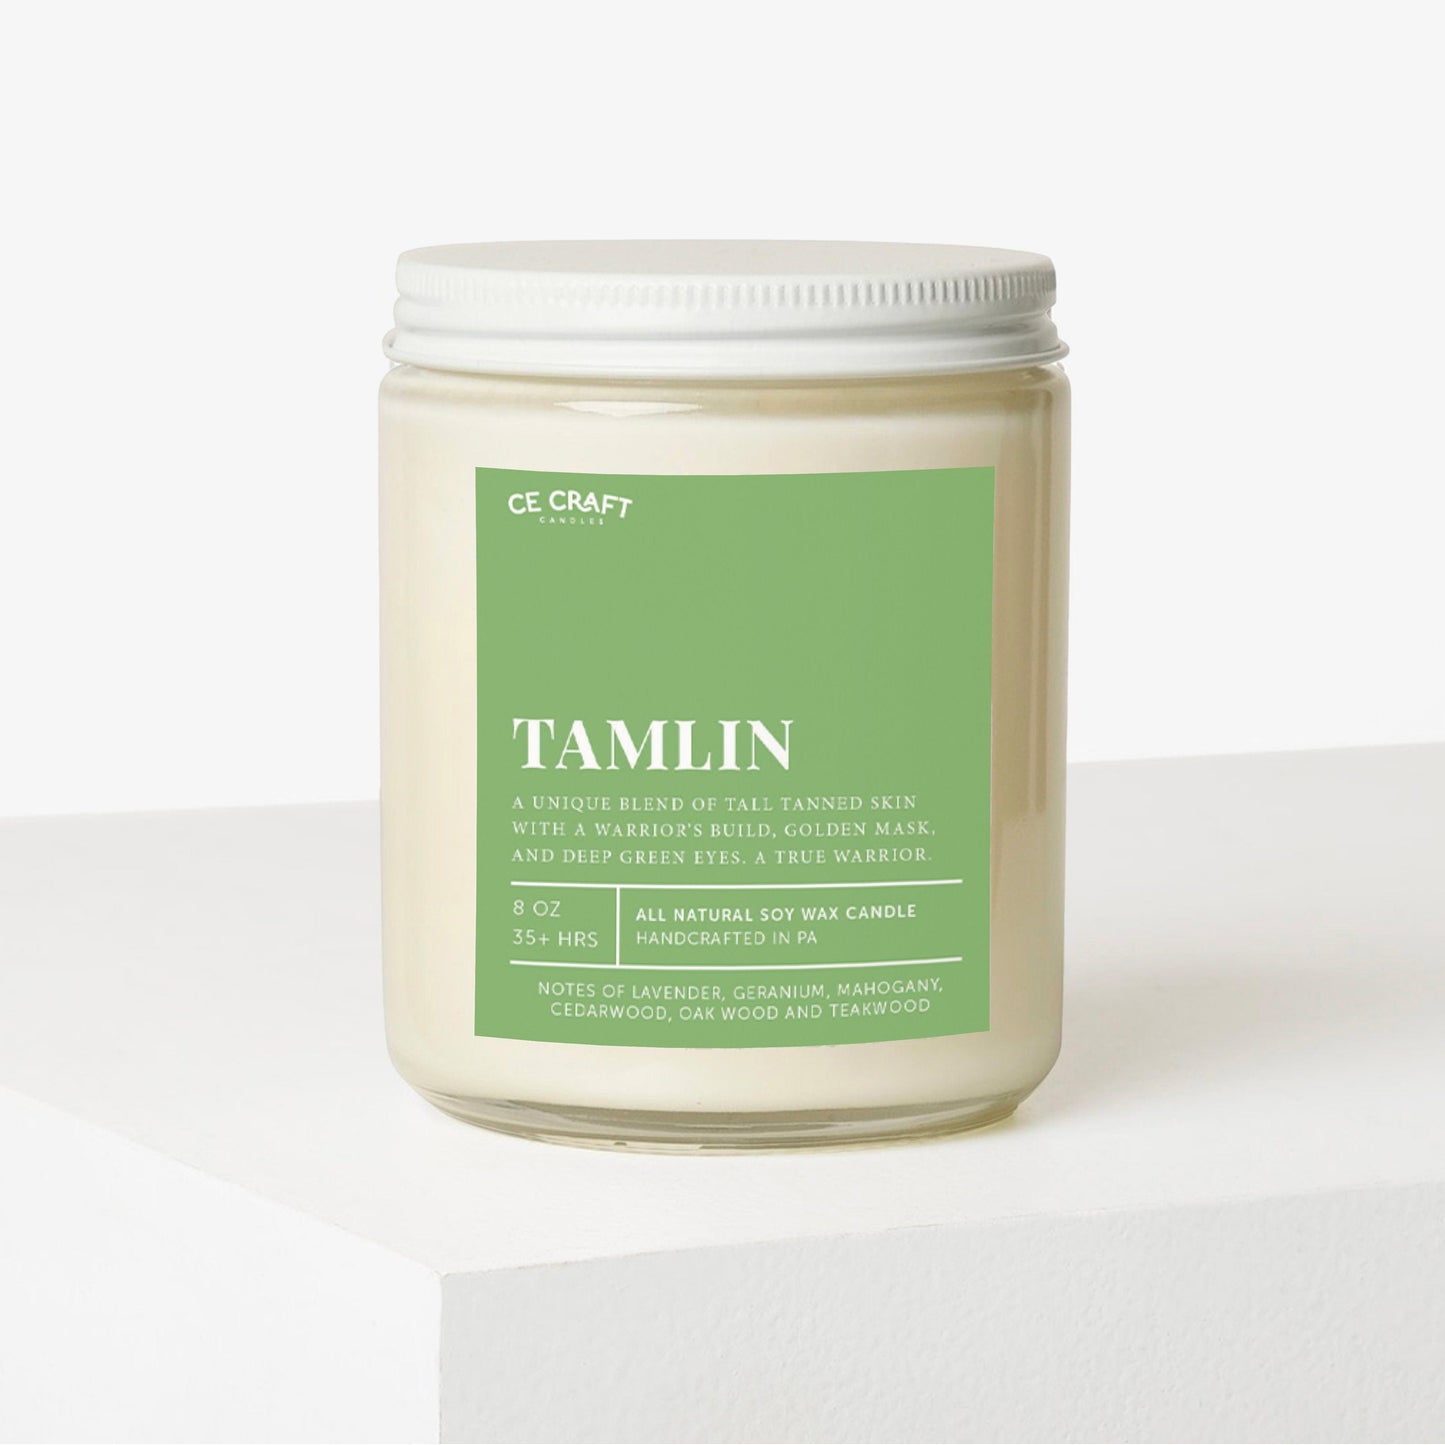 Tamlin Scented Soy Wax Candle C & E Craft Co 